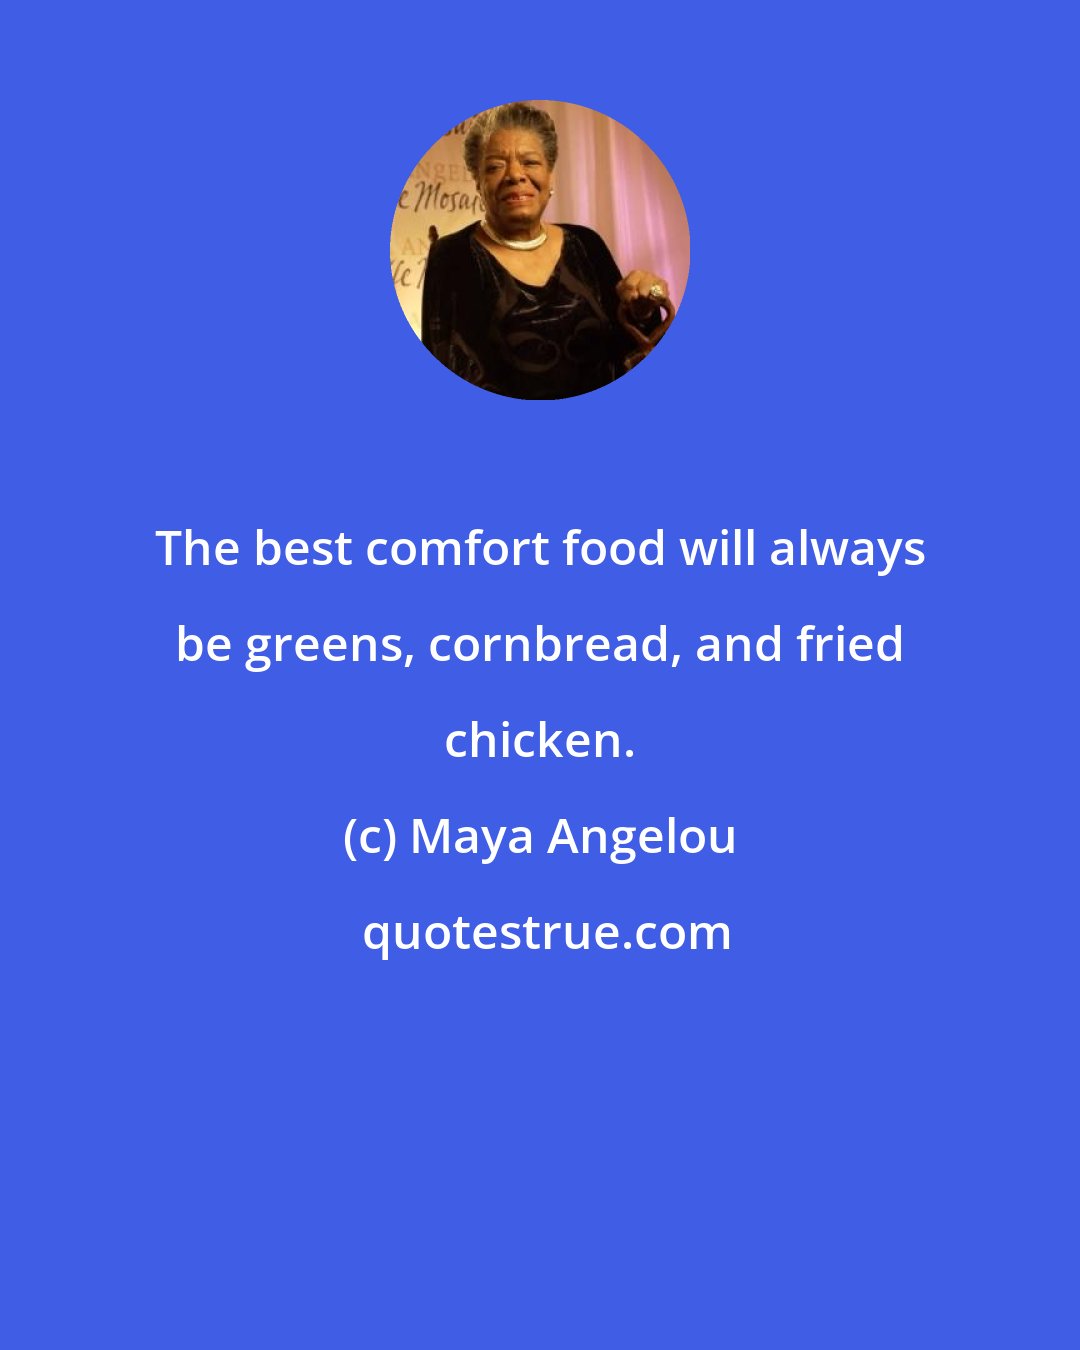 Maya Angelou: The best comfort food will always be greens, cornbread, and fried chicken.